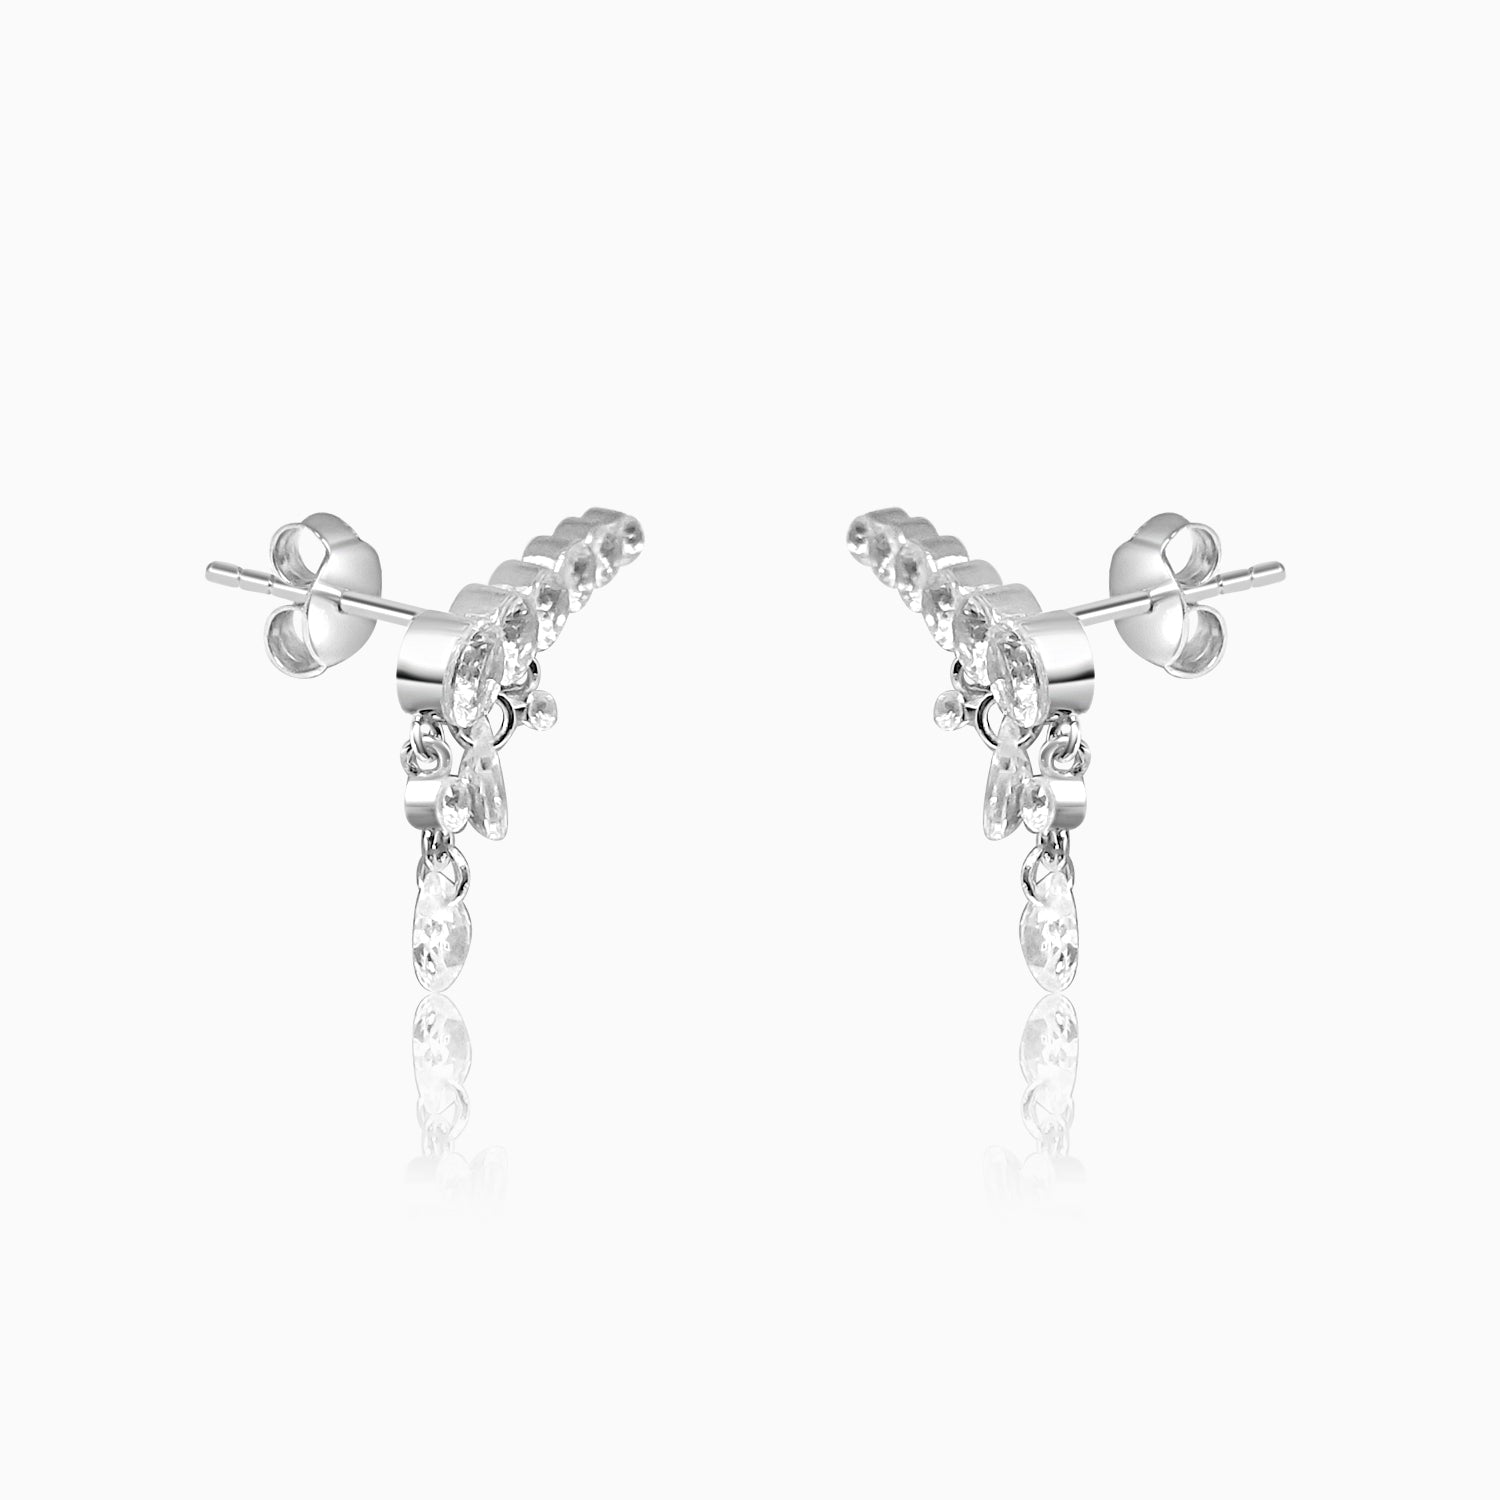 Silver Ascending Solitaires with Swarovski Danglers Earrings